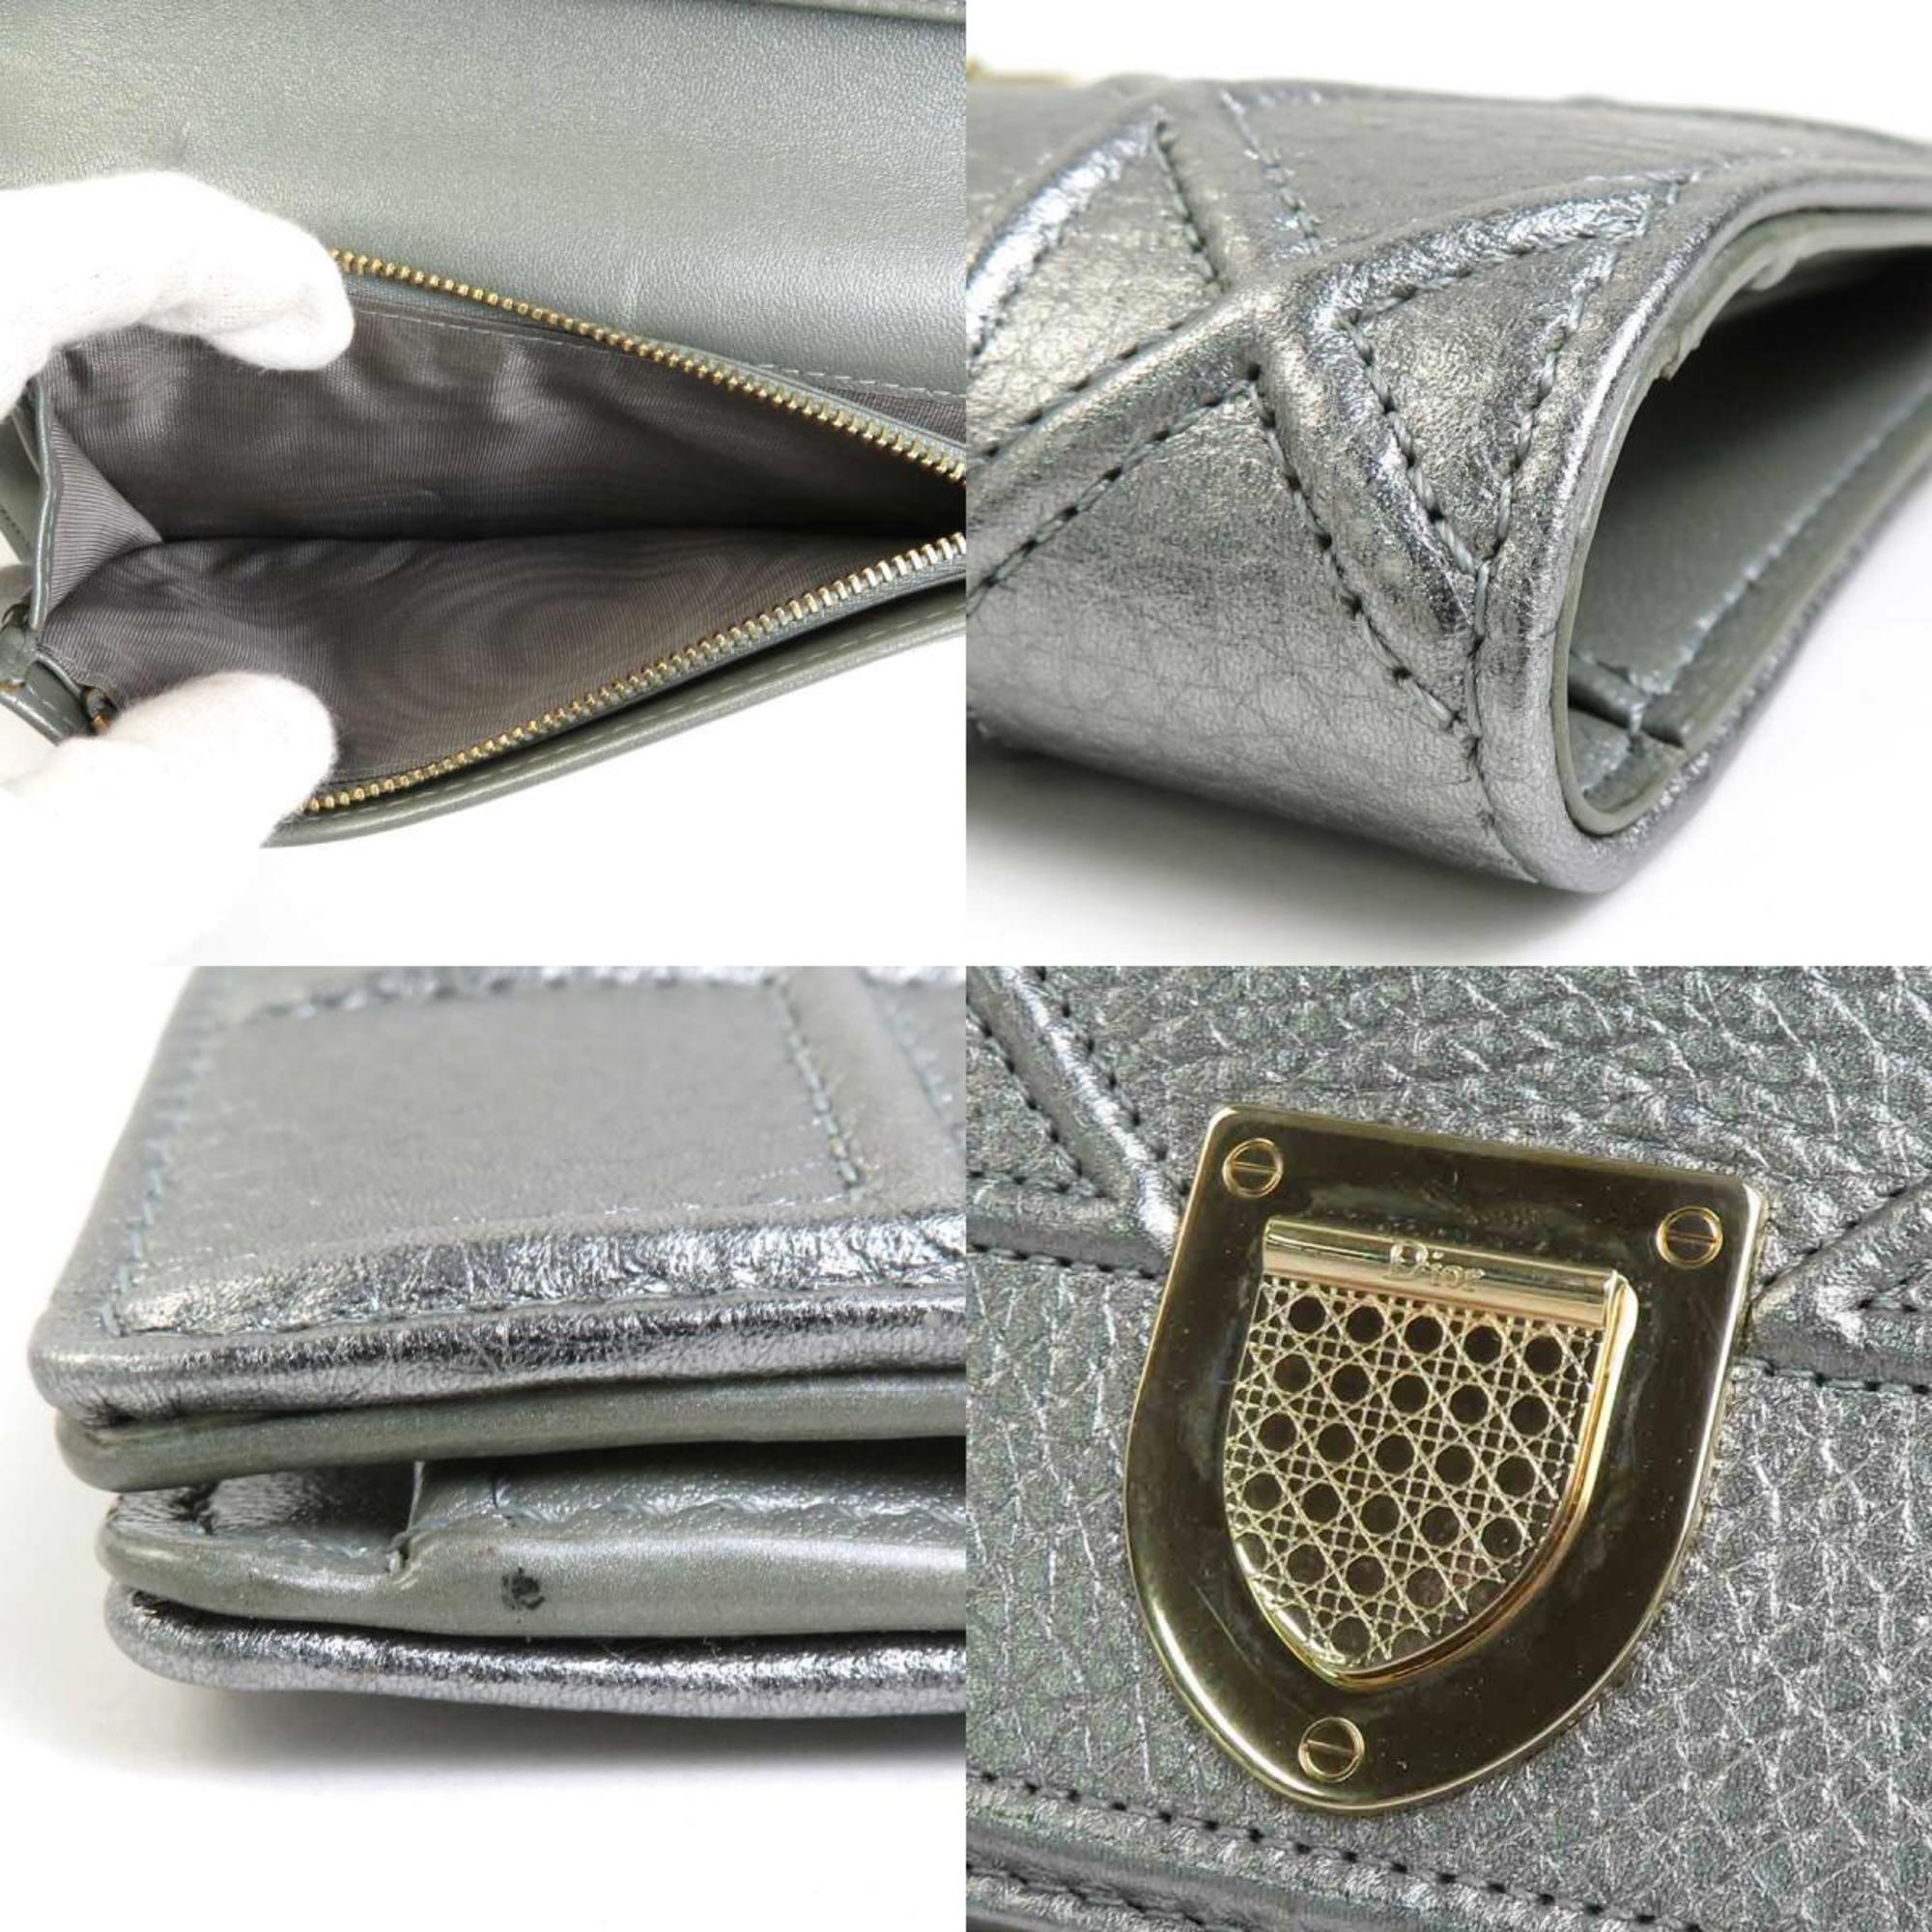 Christian Dior Bifold Long Wallet Diorama Leather Silver Women's